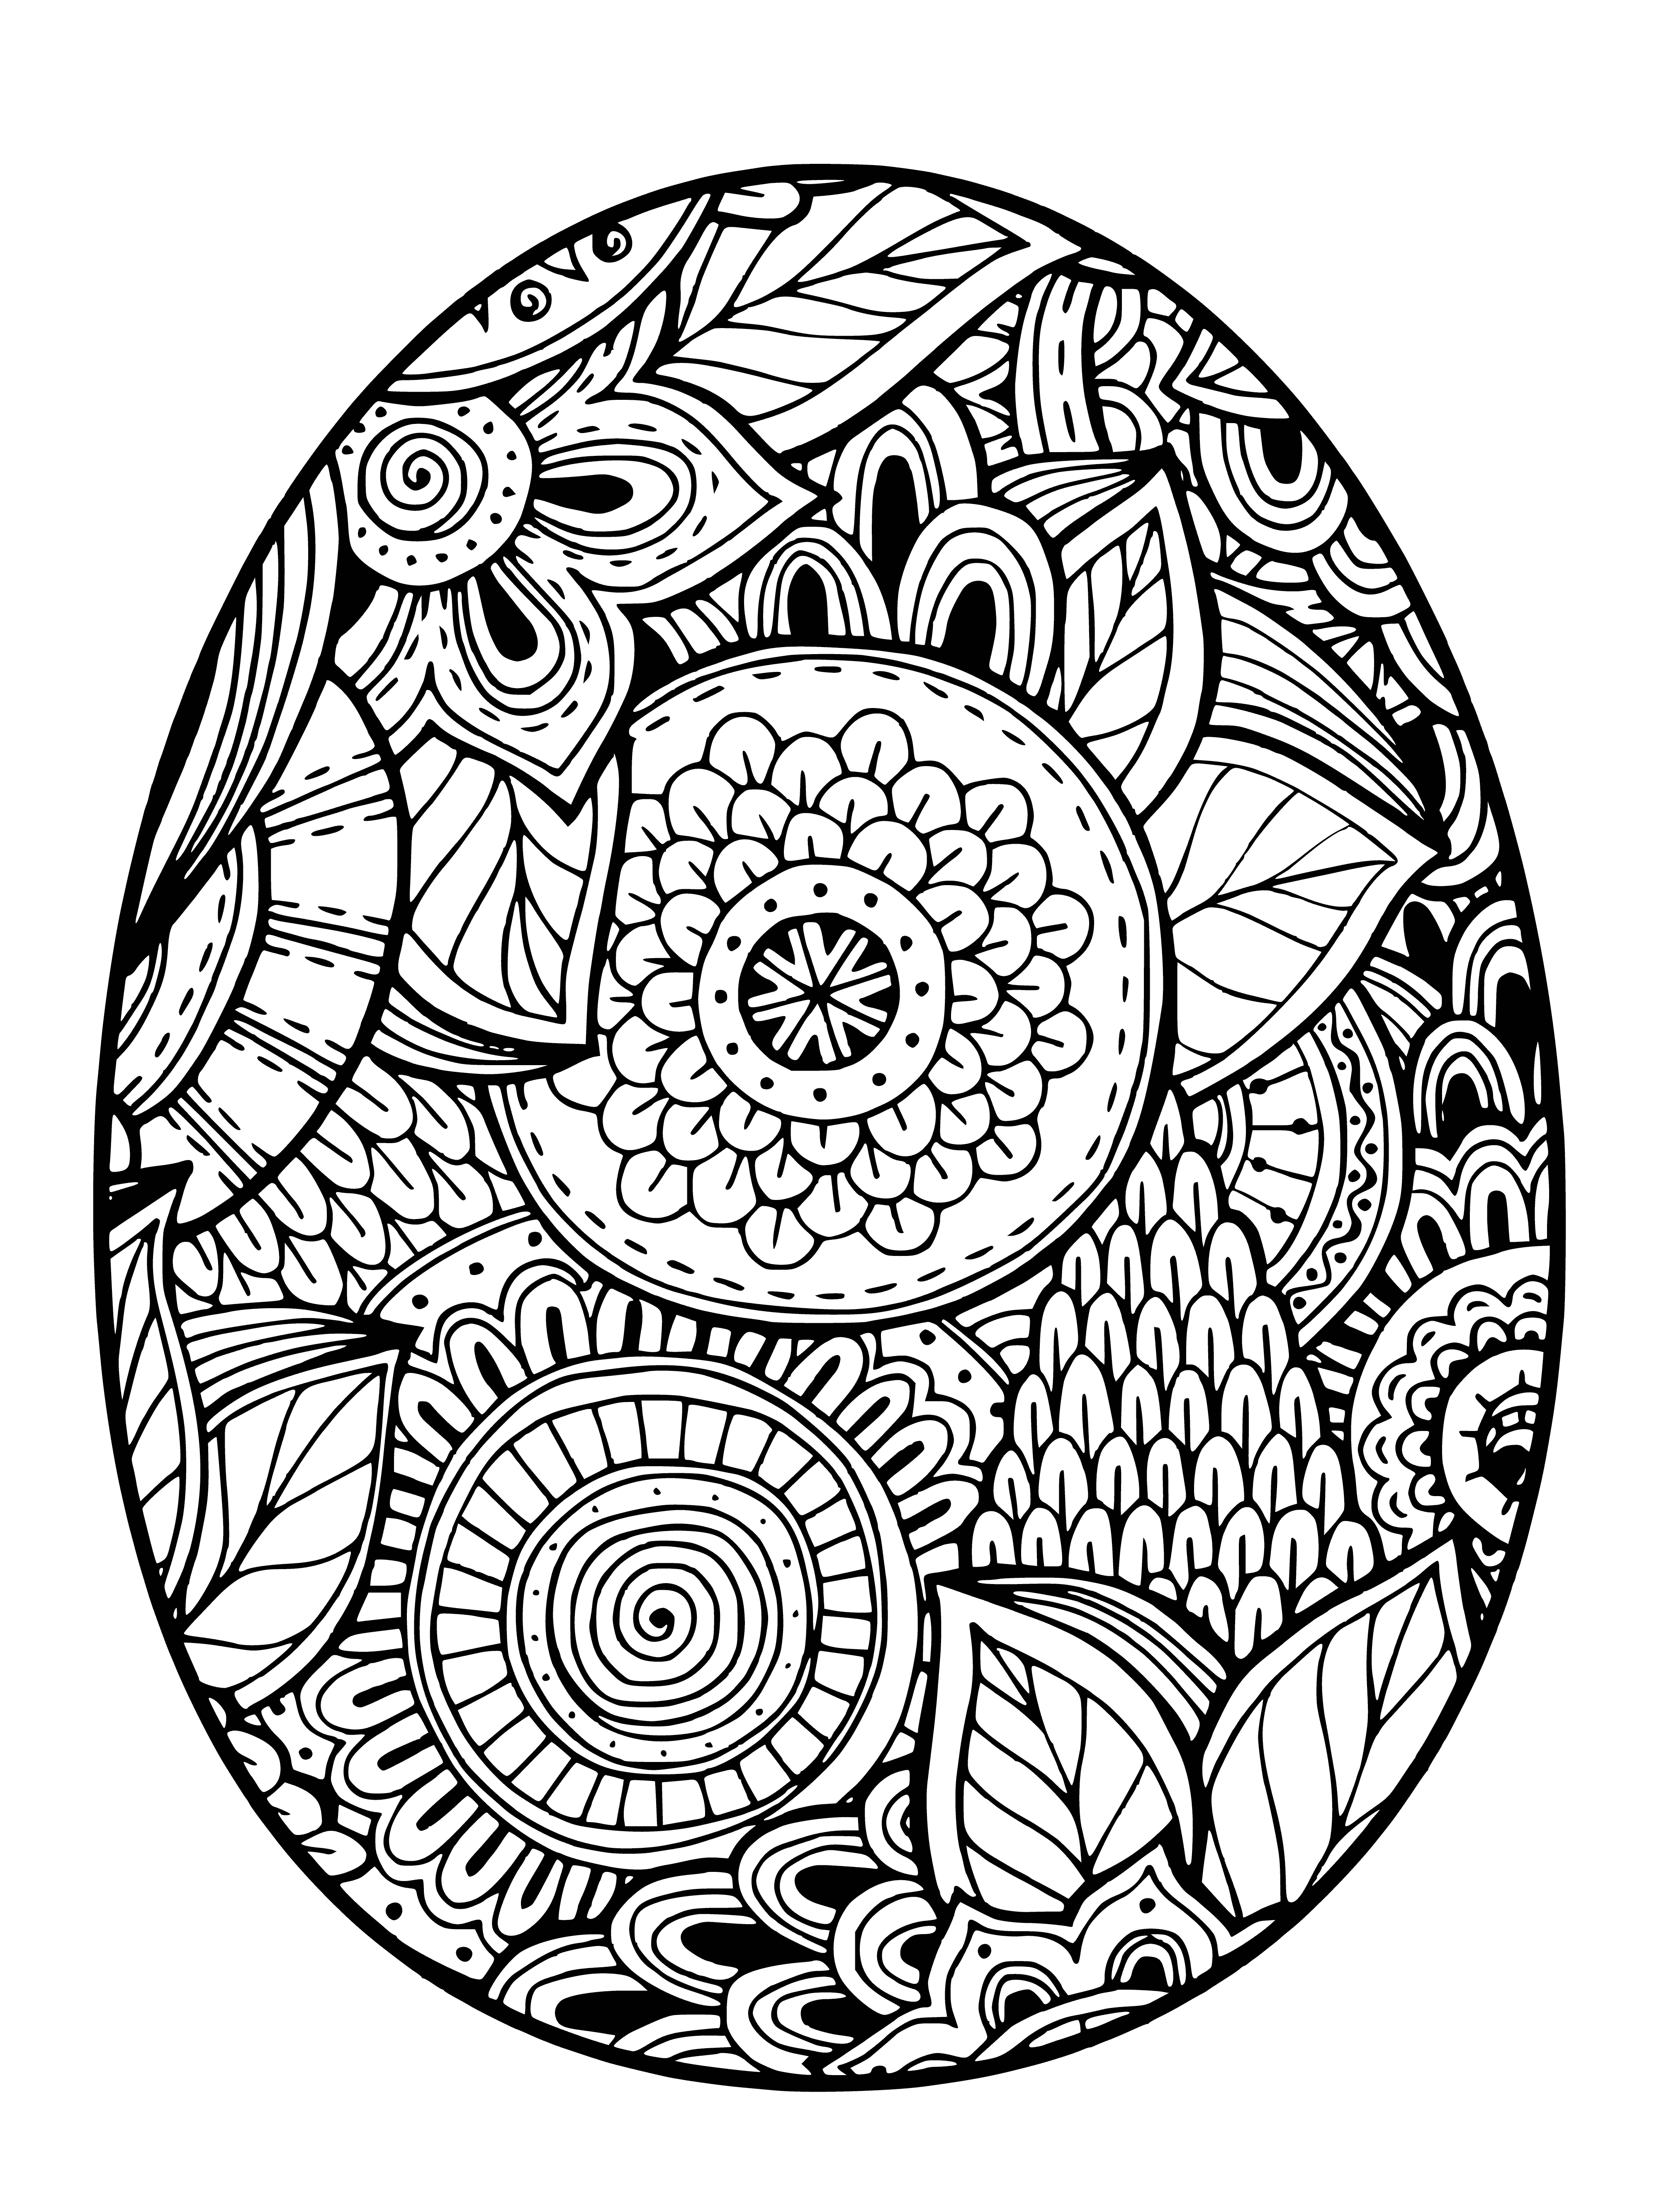 coloring page: A colored Easter egg in the center, with a bunny holding a basket of eggs next to it.